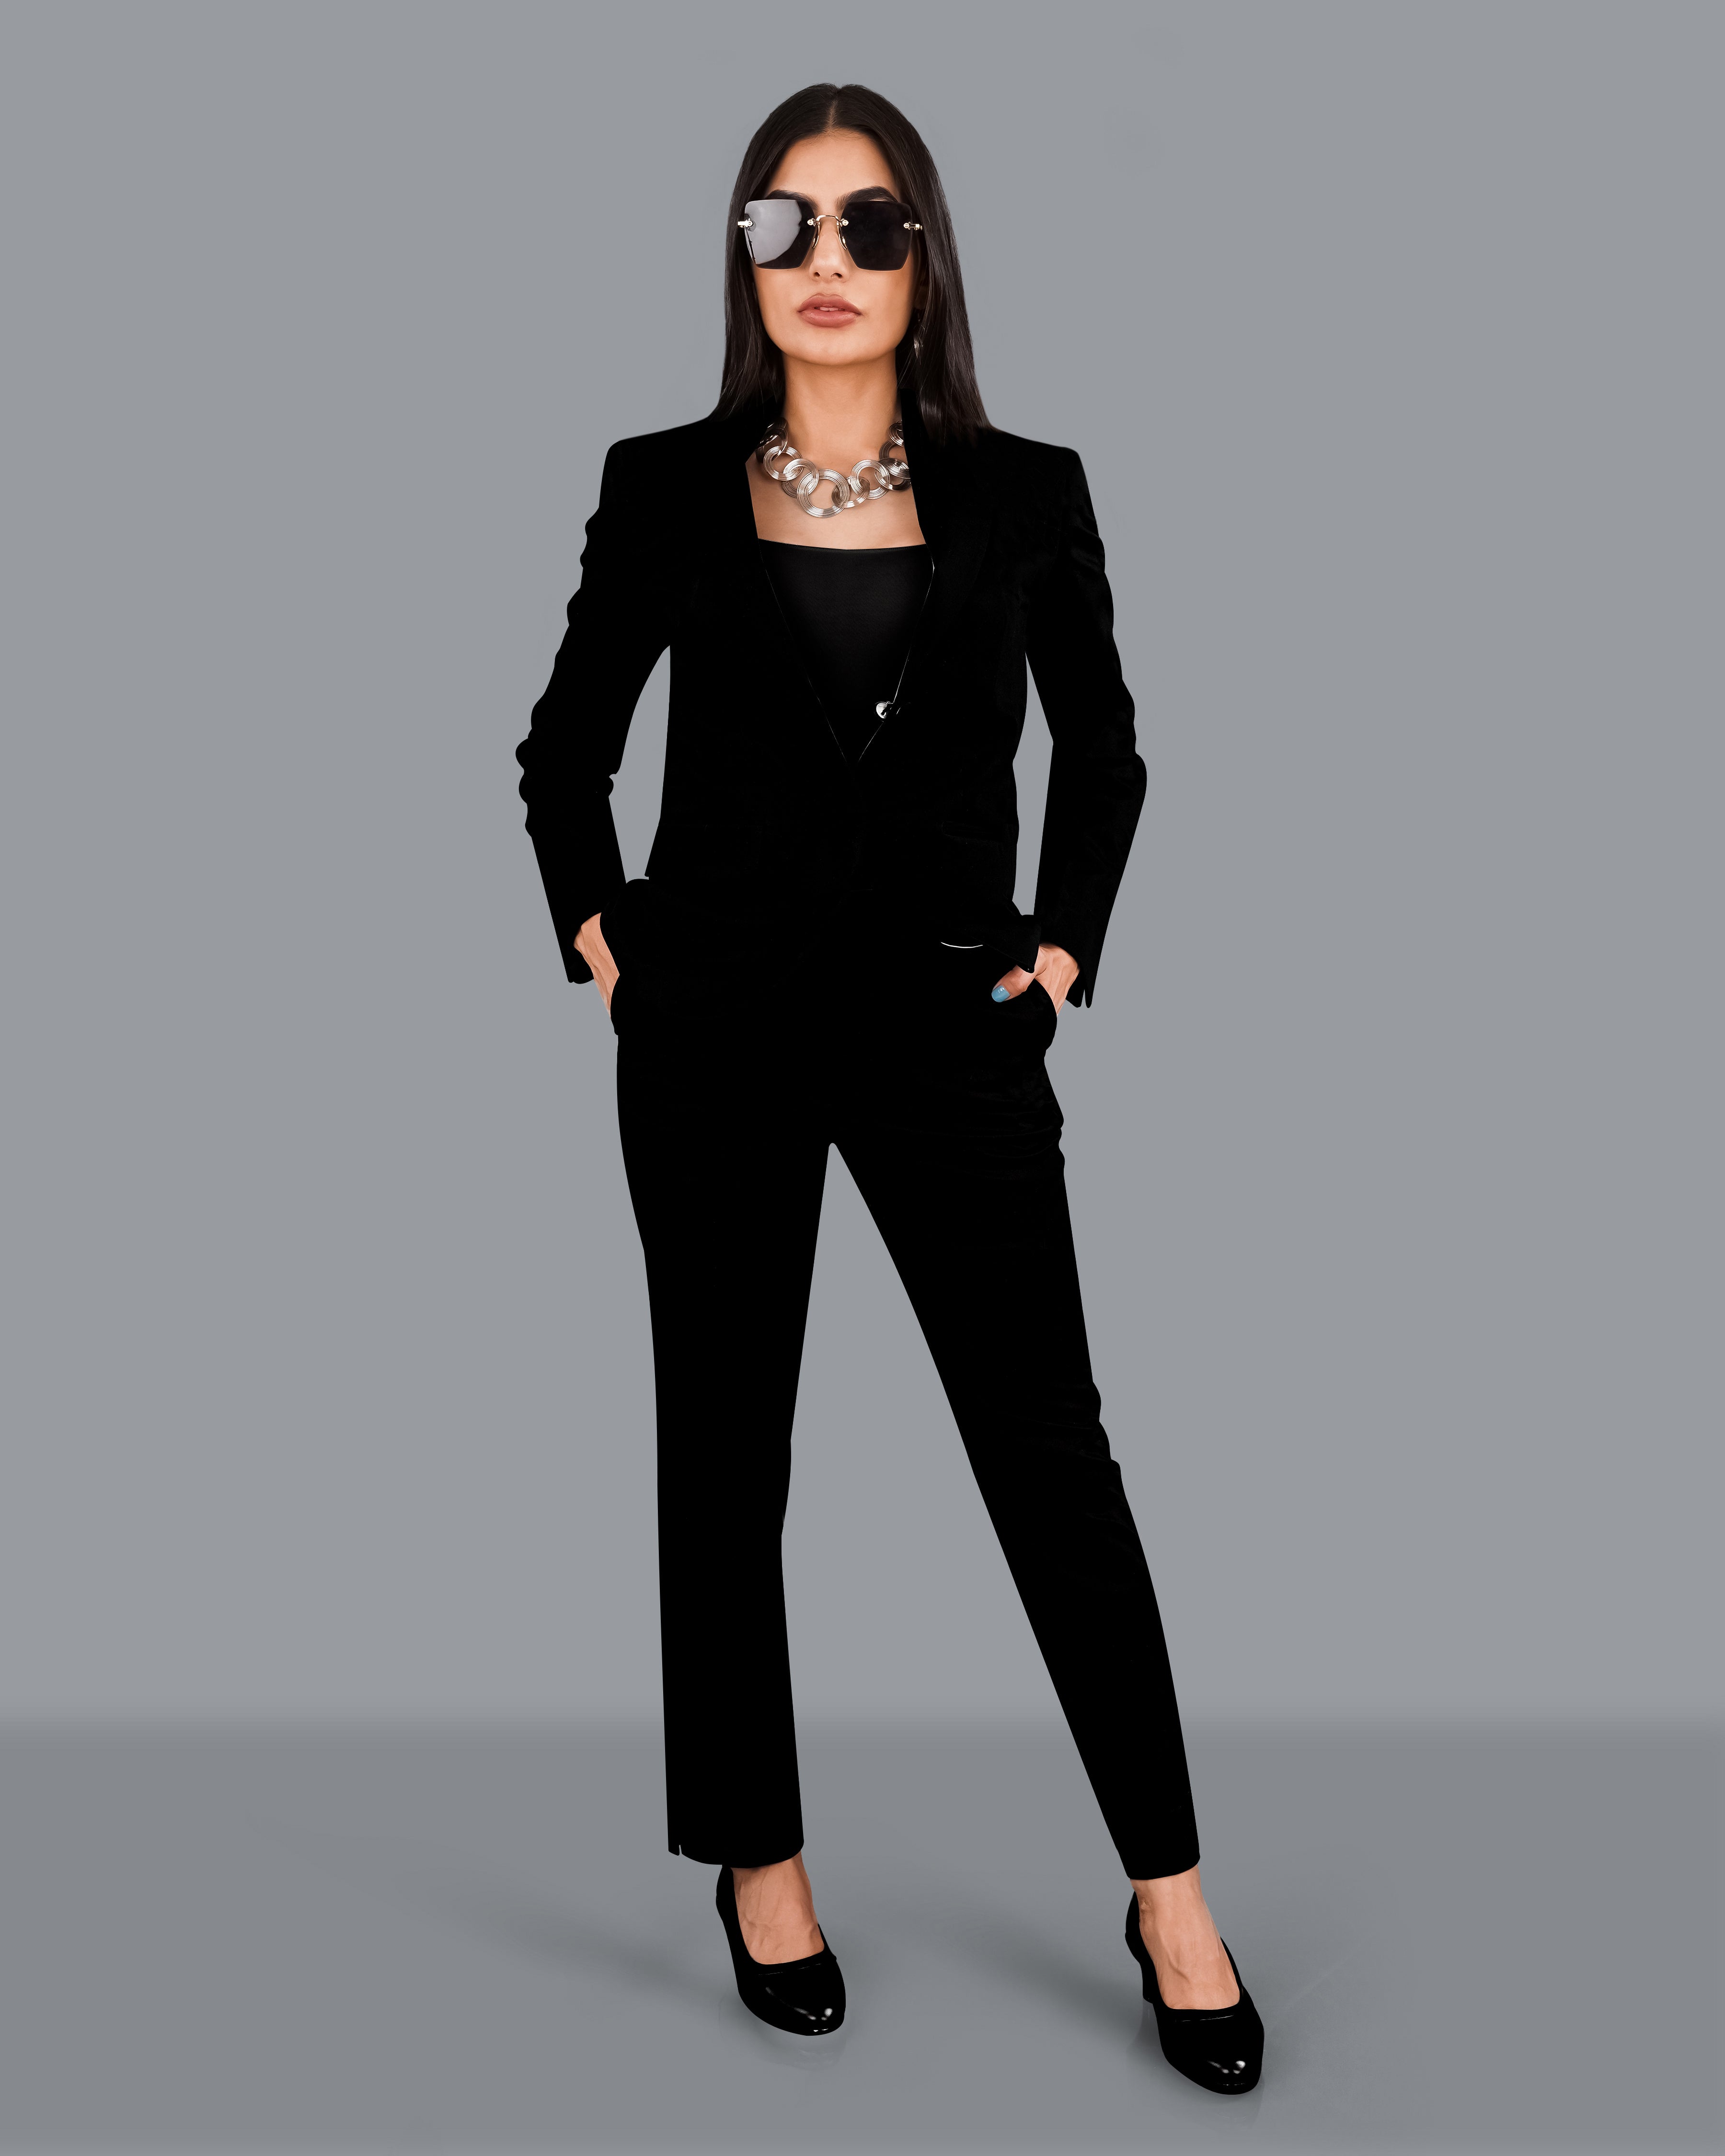 Top more than 139 formal suits for women